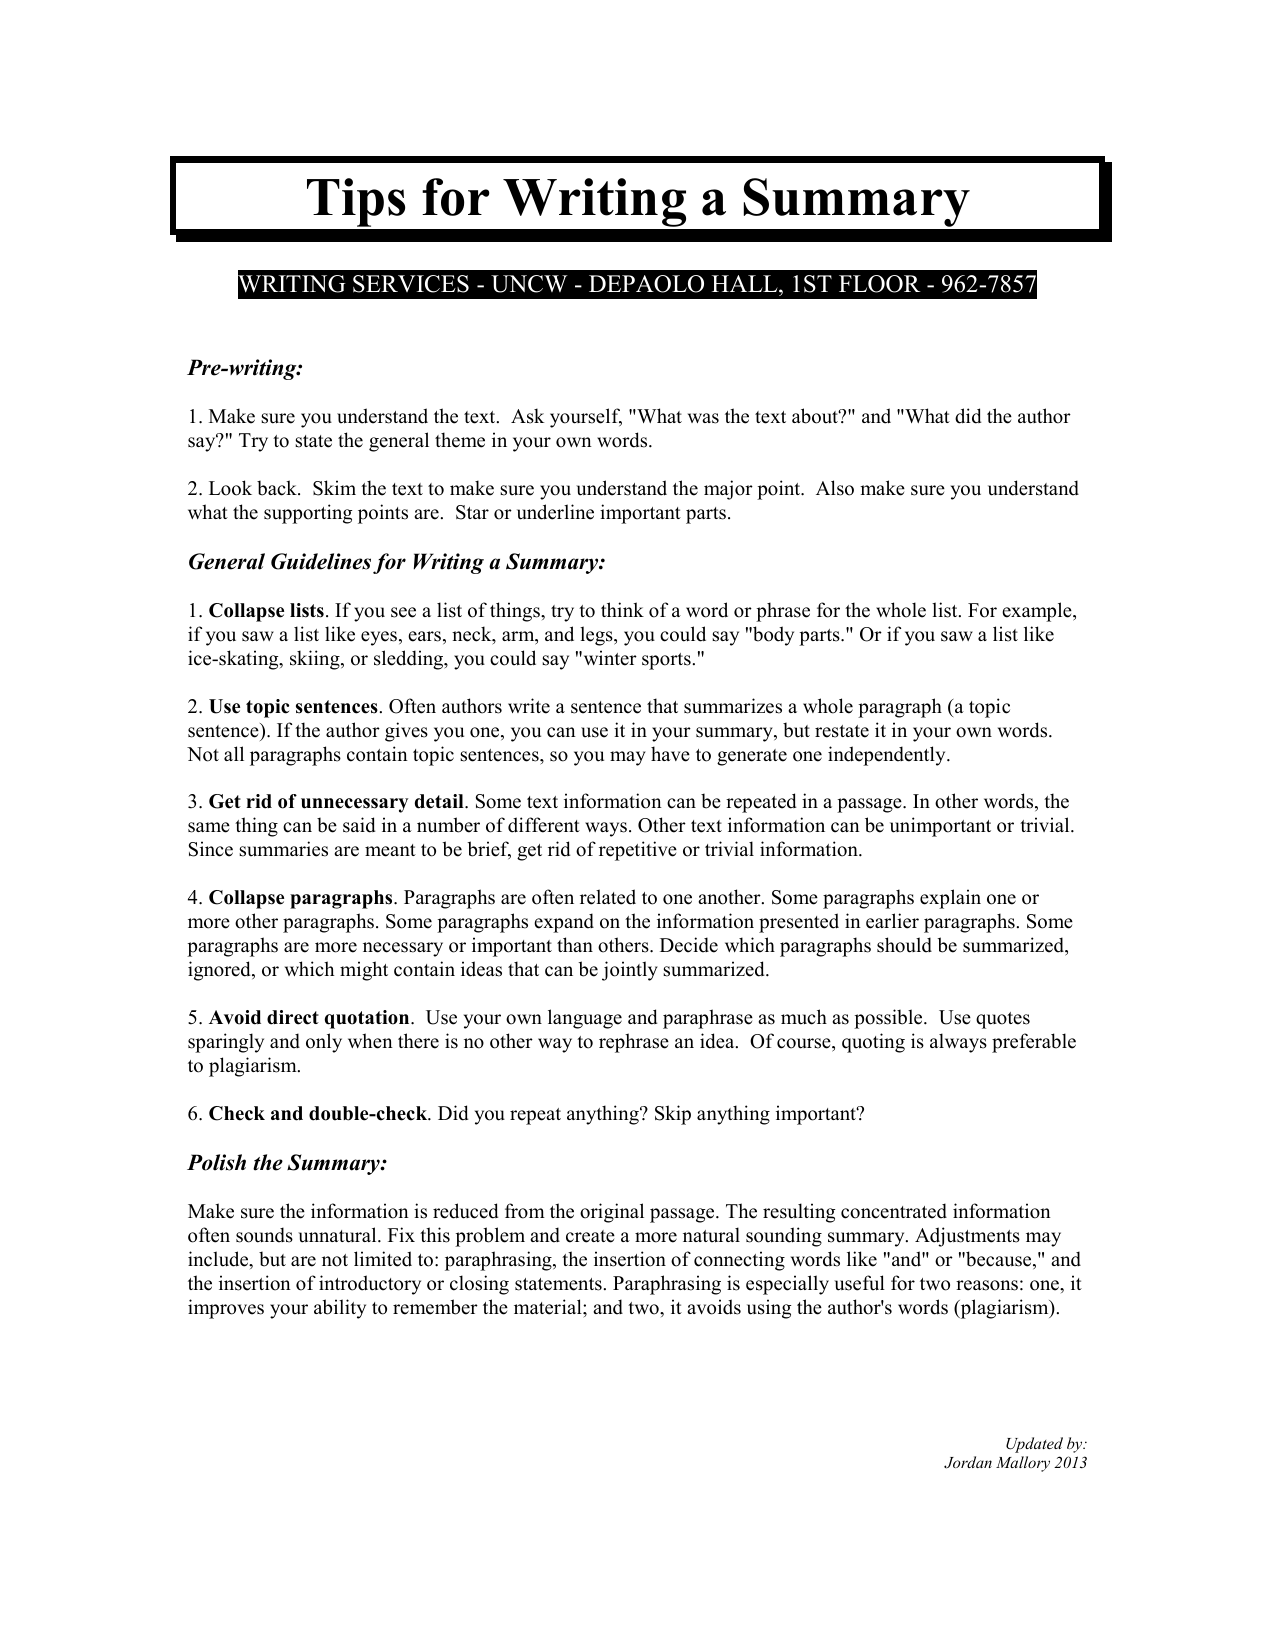 Tips for Writing a Summary Pre-writing: